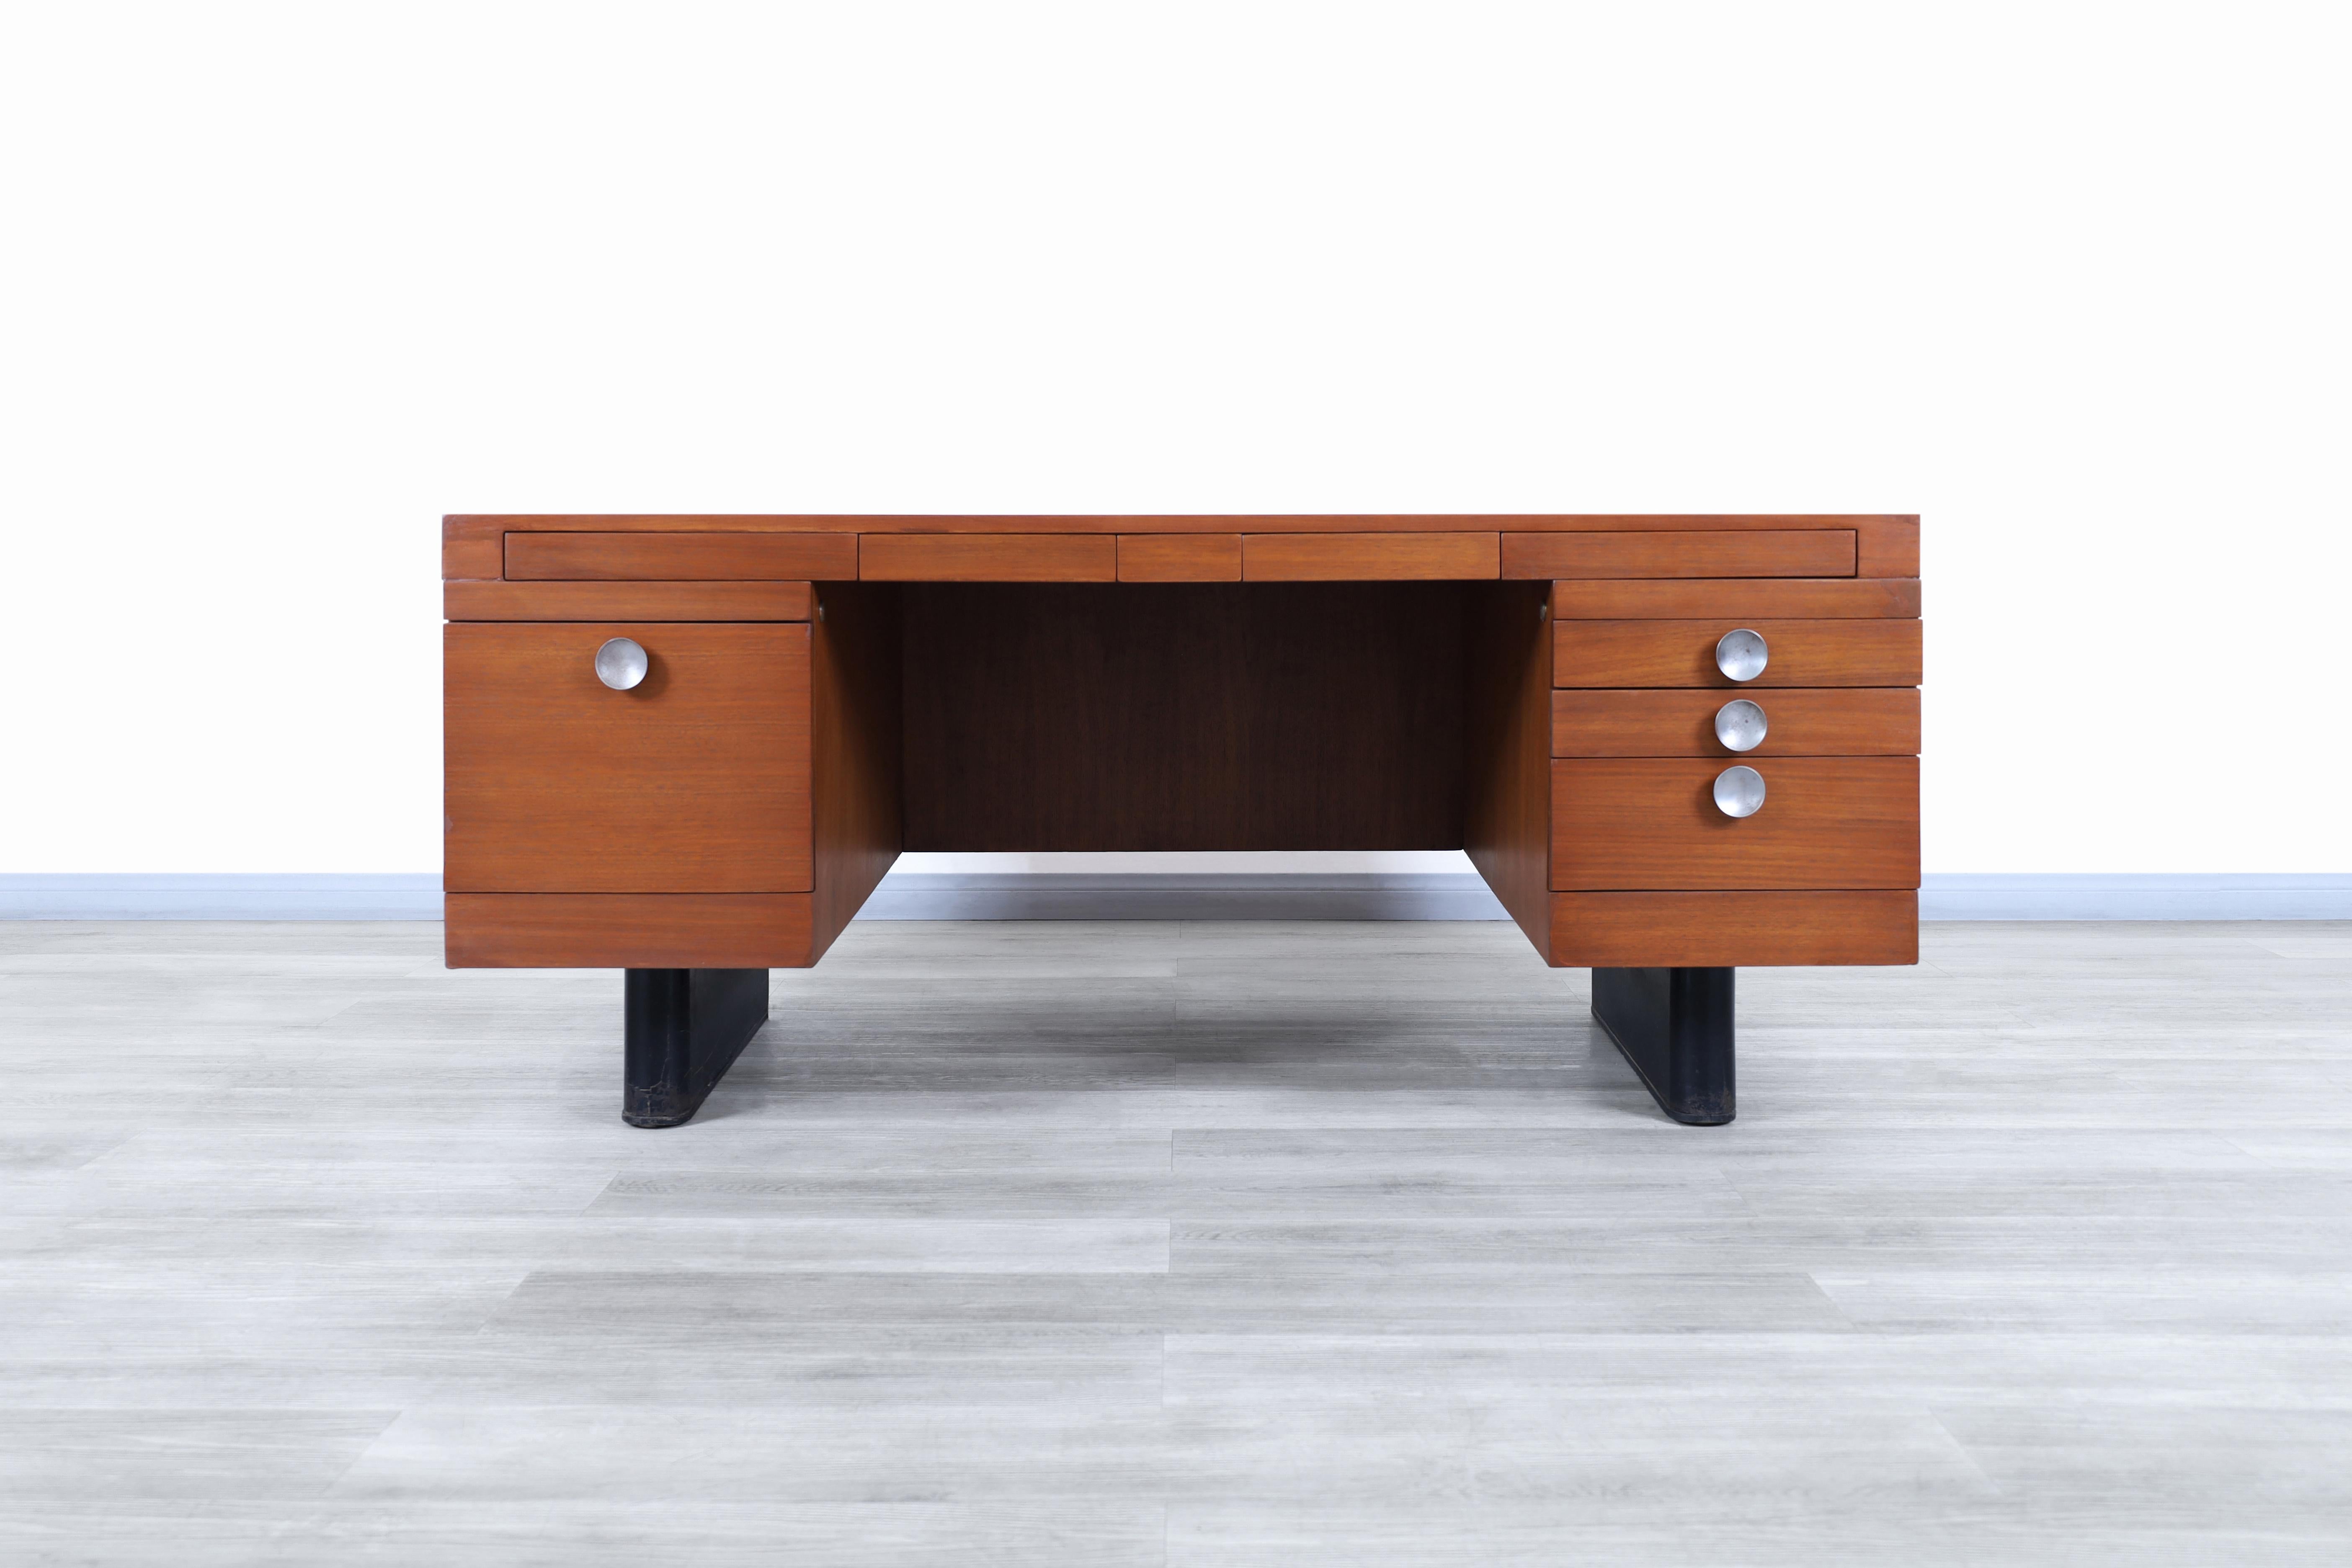 Exceptional vintage executive walnut desk designed by Gilbert Rohde for Herman Miller in the United States, circa 1940s. This desk represents in a significant way the expression of the art deco movement through its elaborate construction lines and